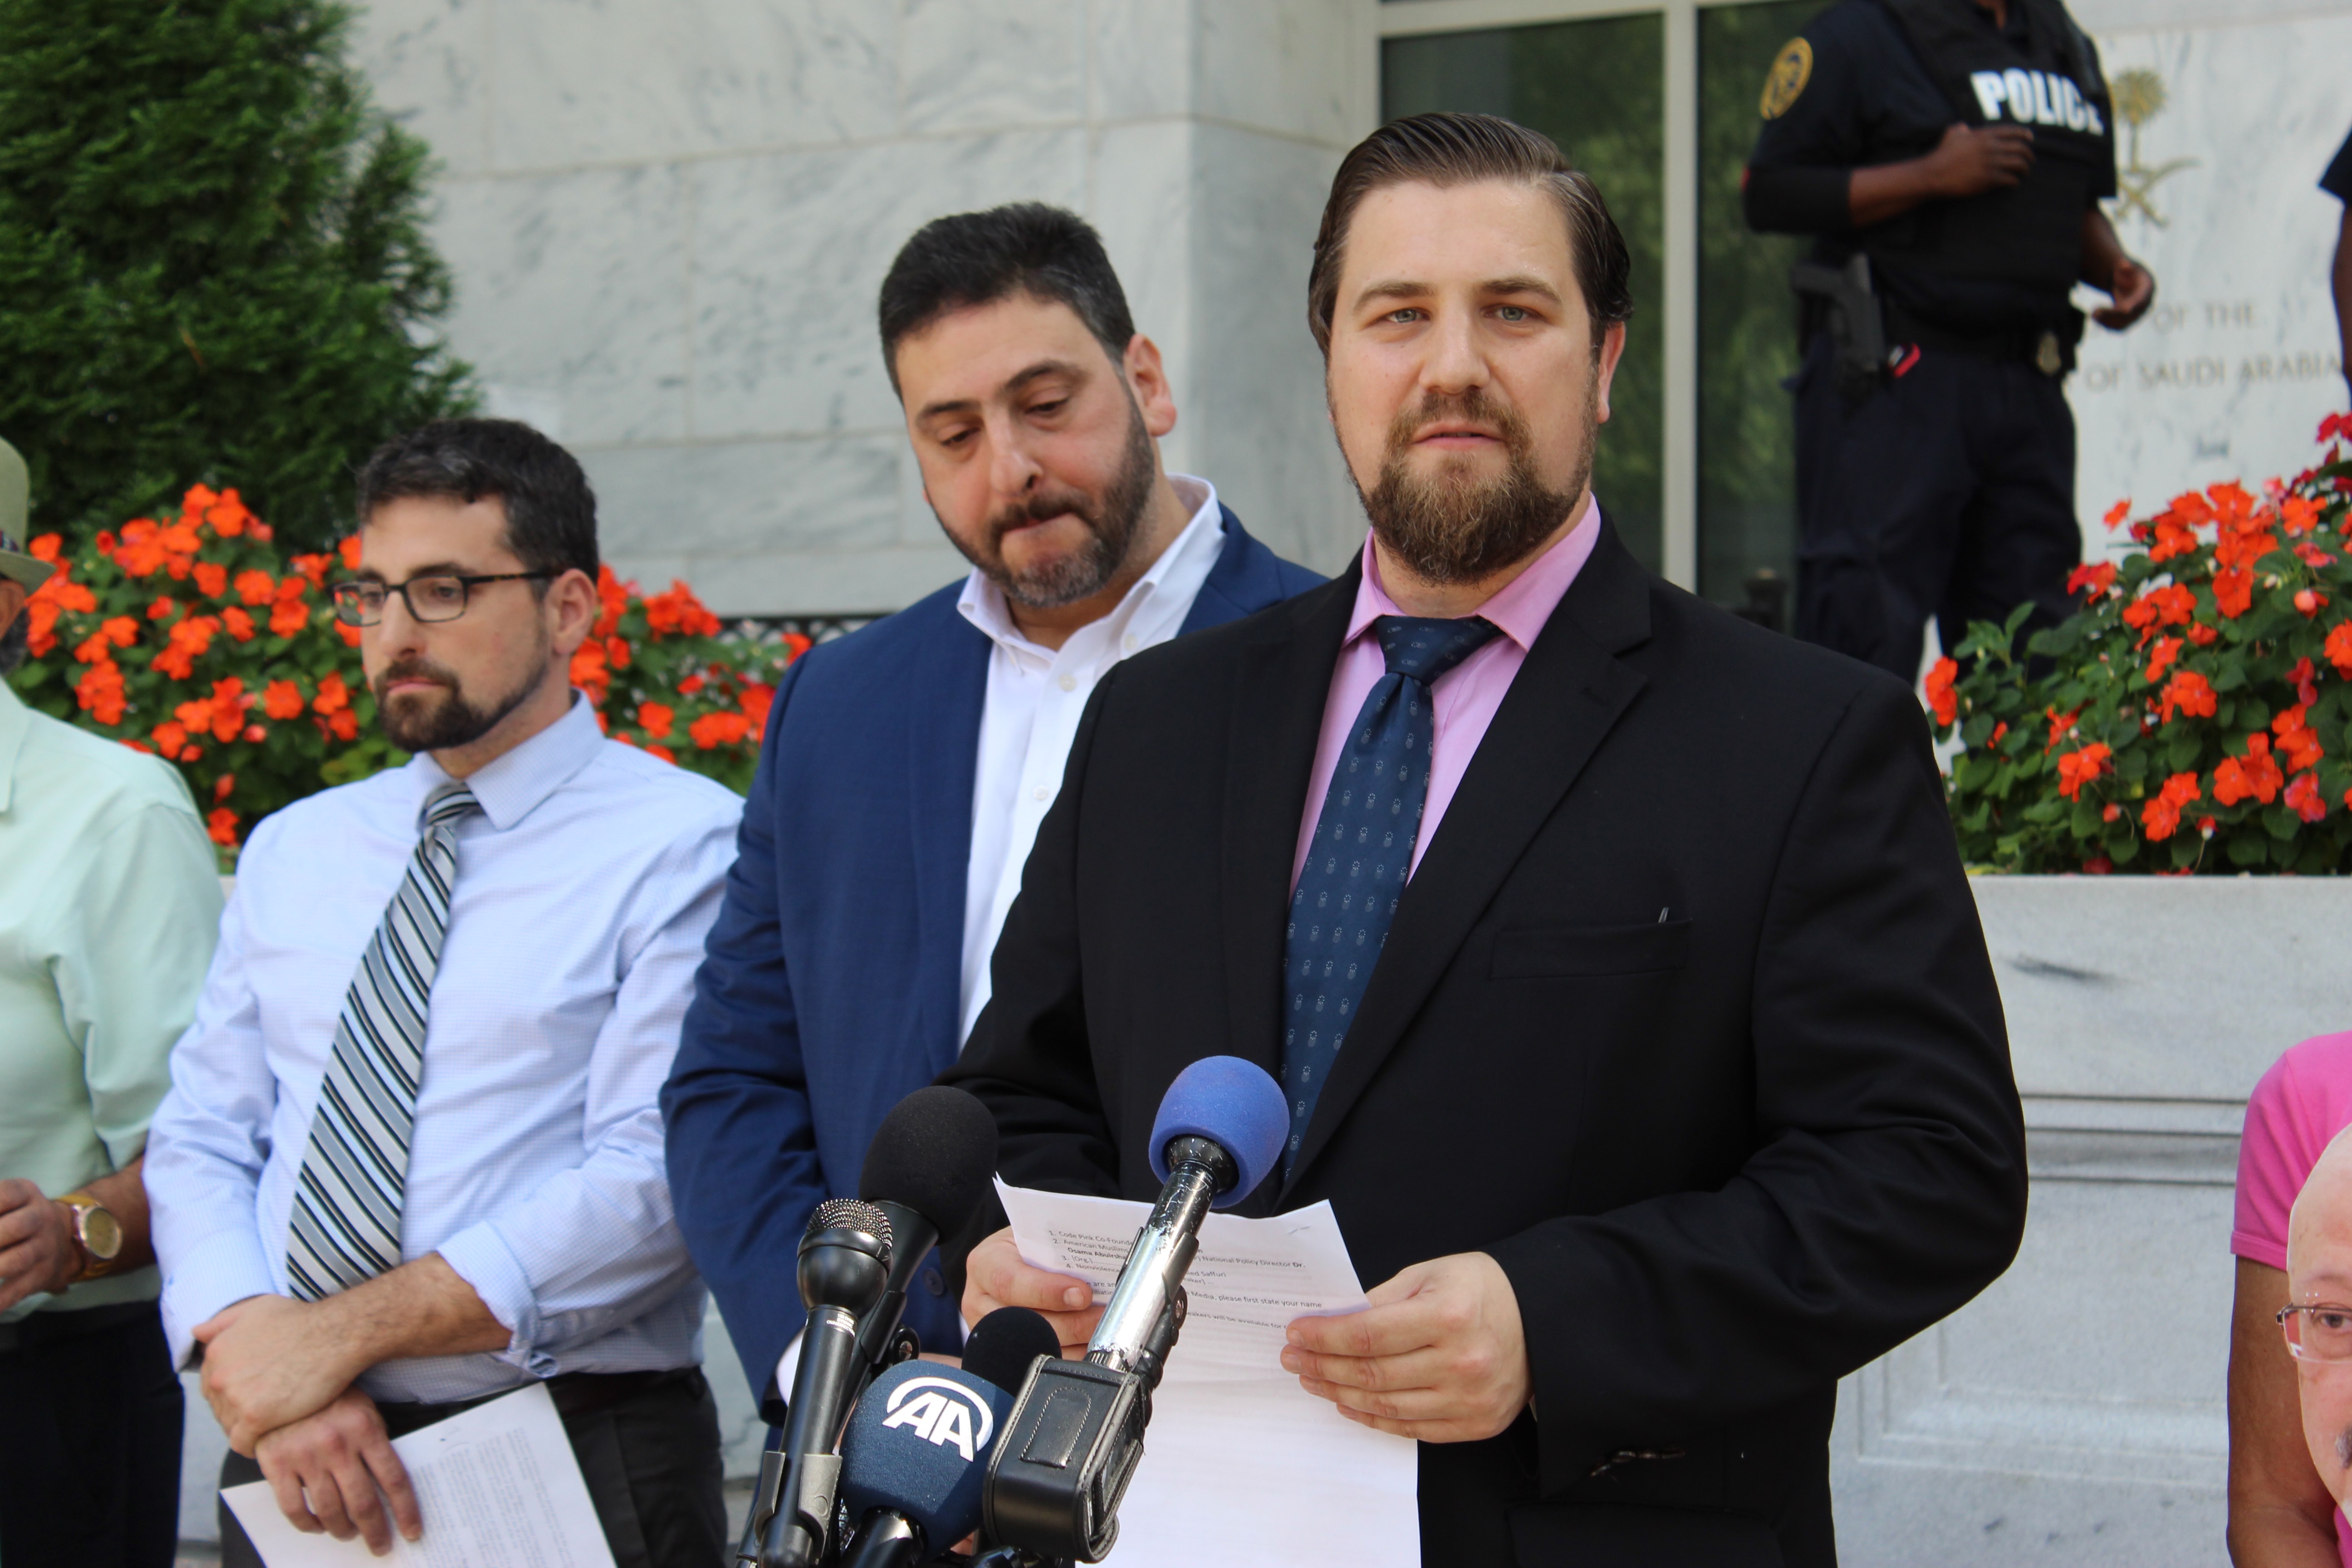 CAIR's Robert S. McCaw speaks during a press conference held in front of the Saudi embassy in Washington on 2 October 2019 (MEE/Sheren Khalel)